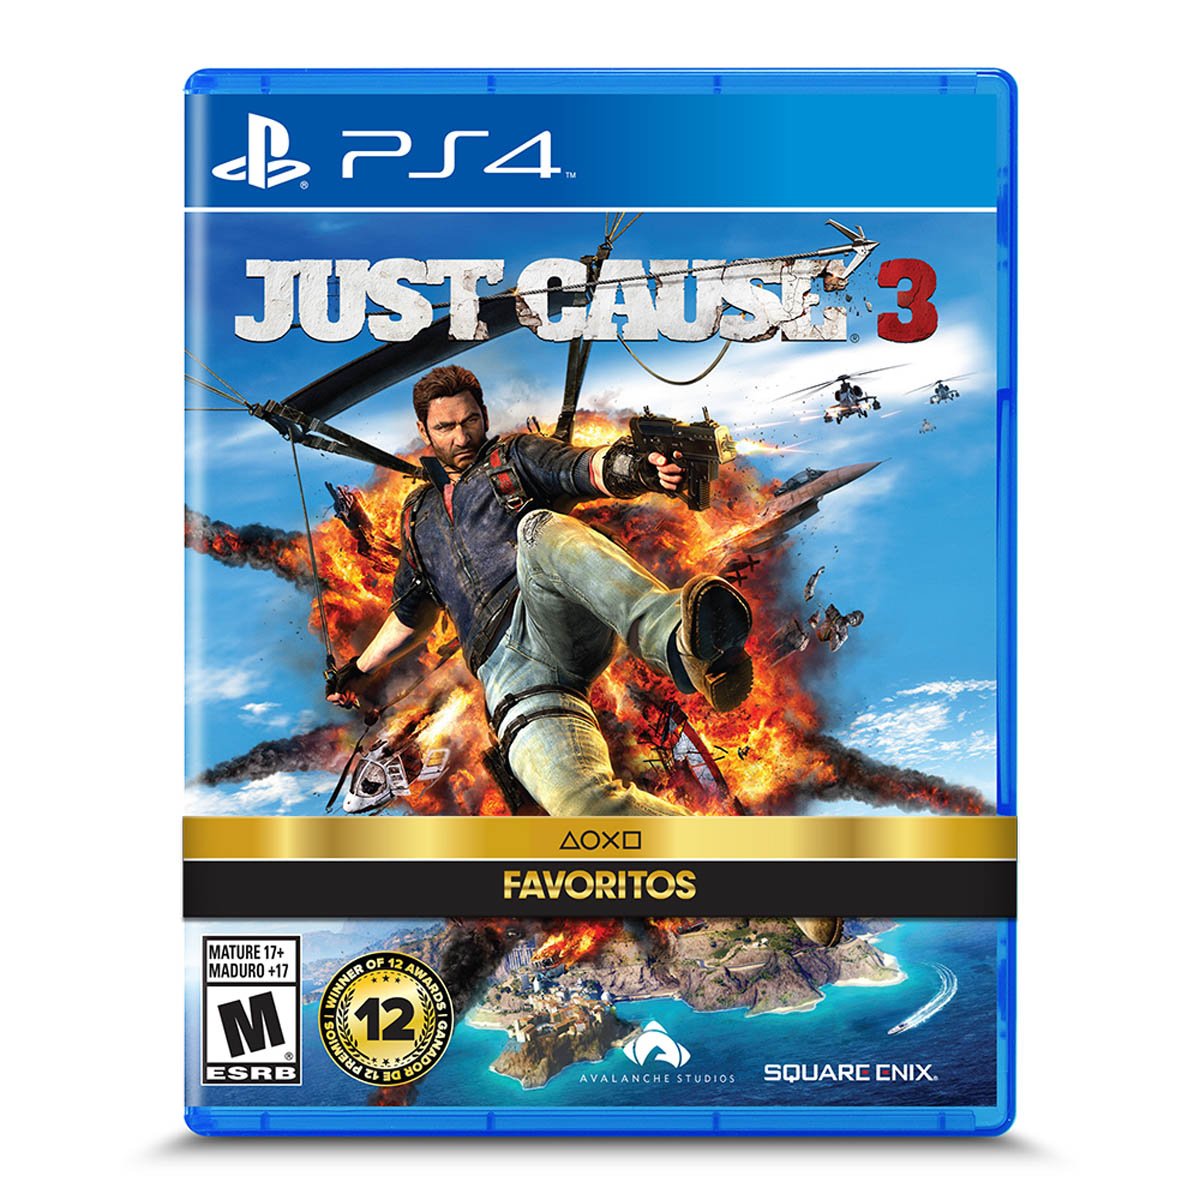 Just cause 3 gold edition ps4 download